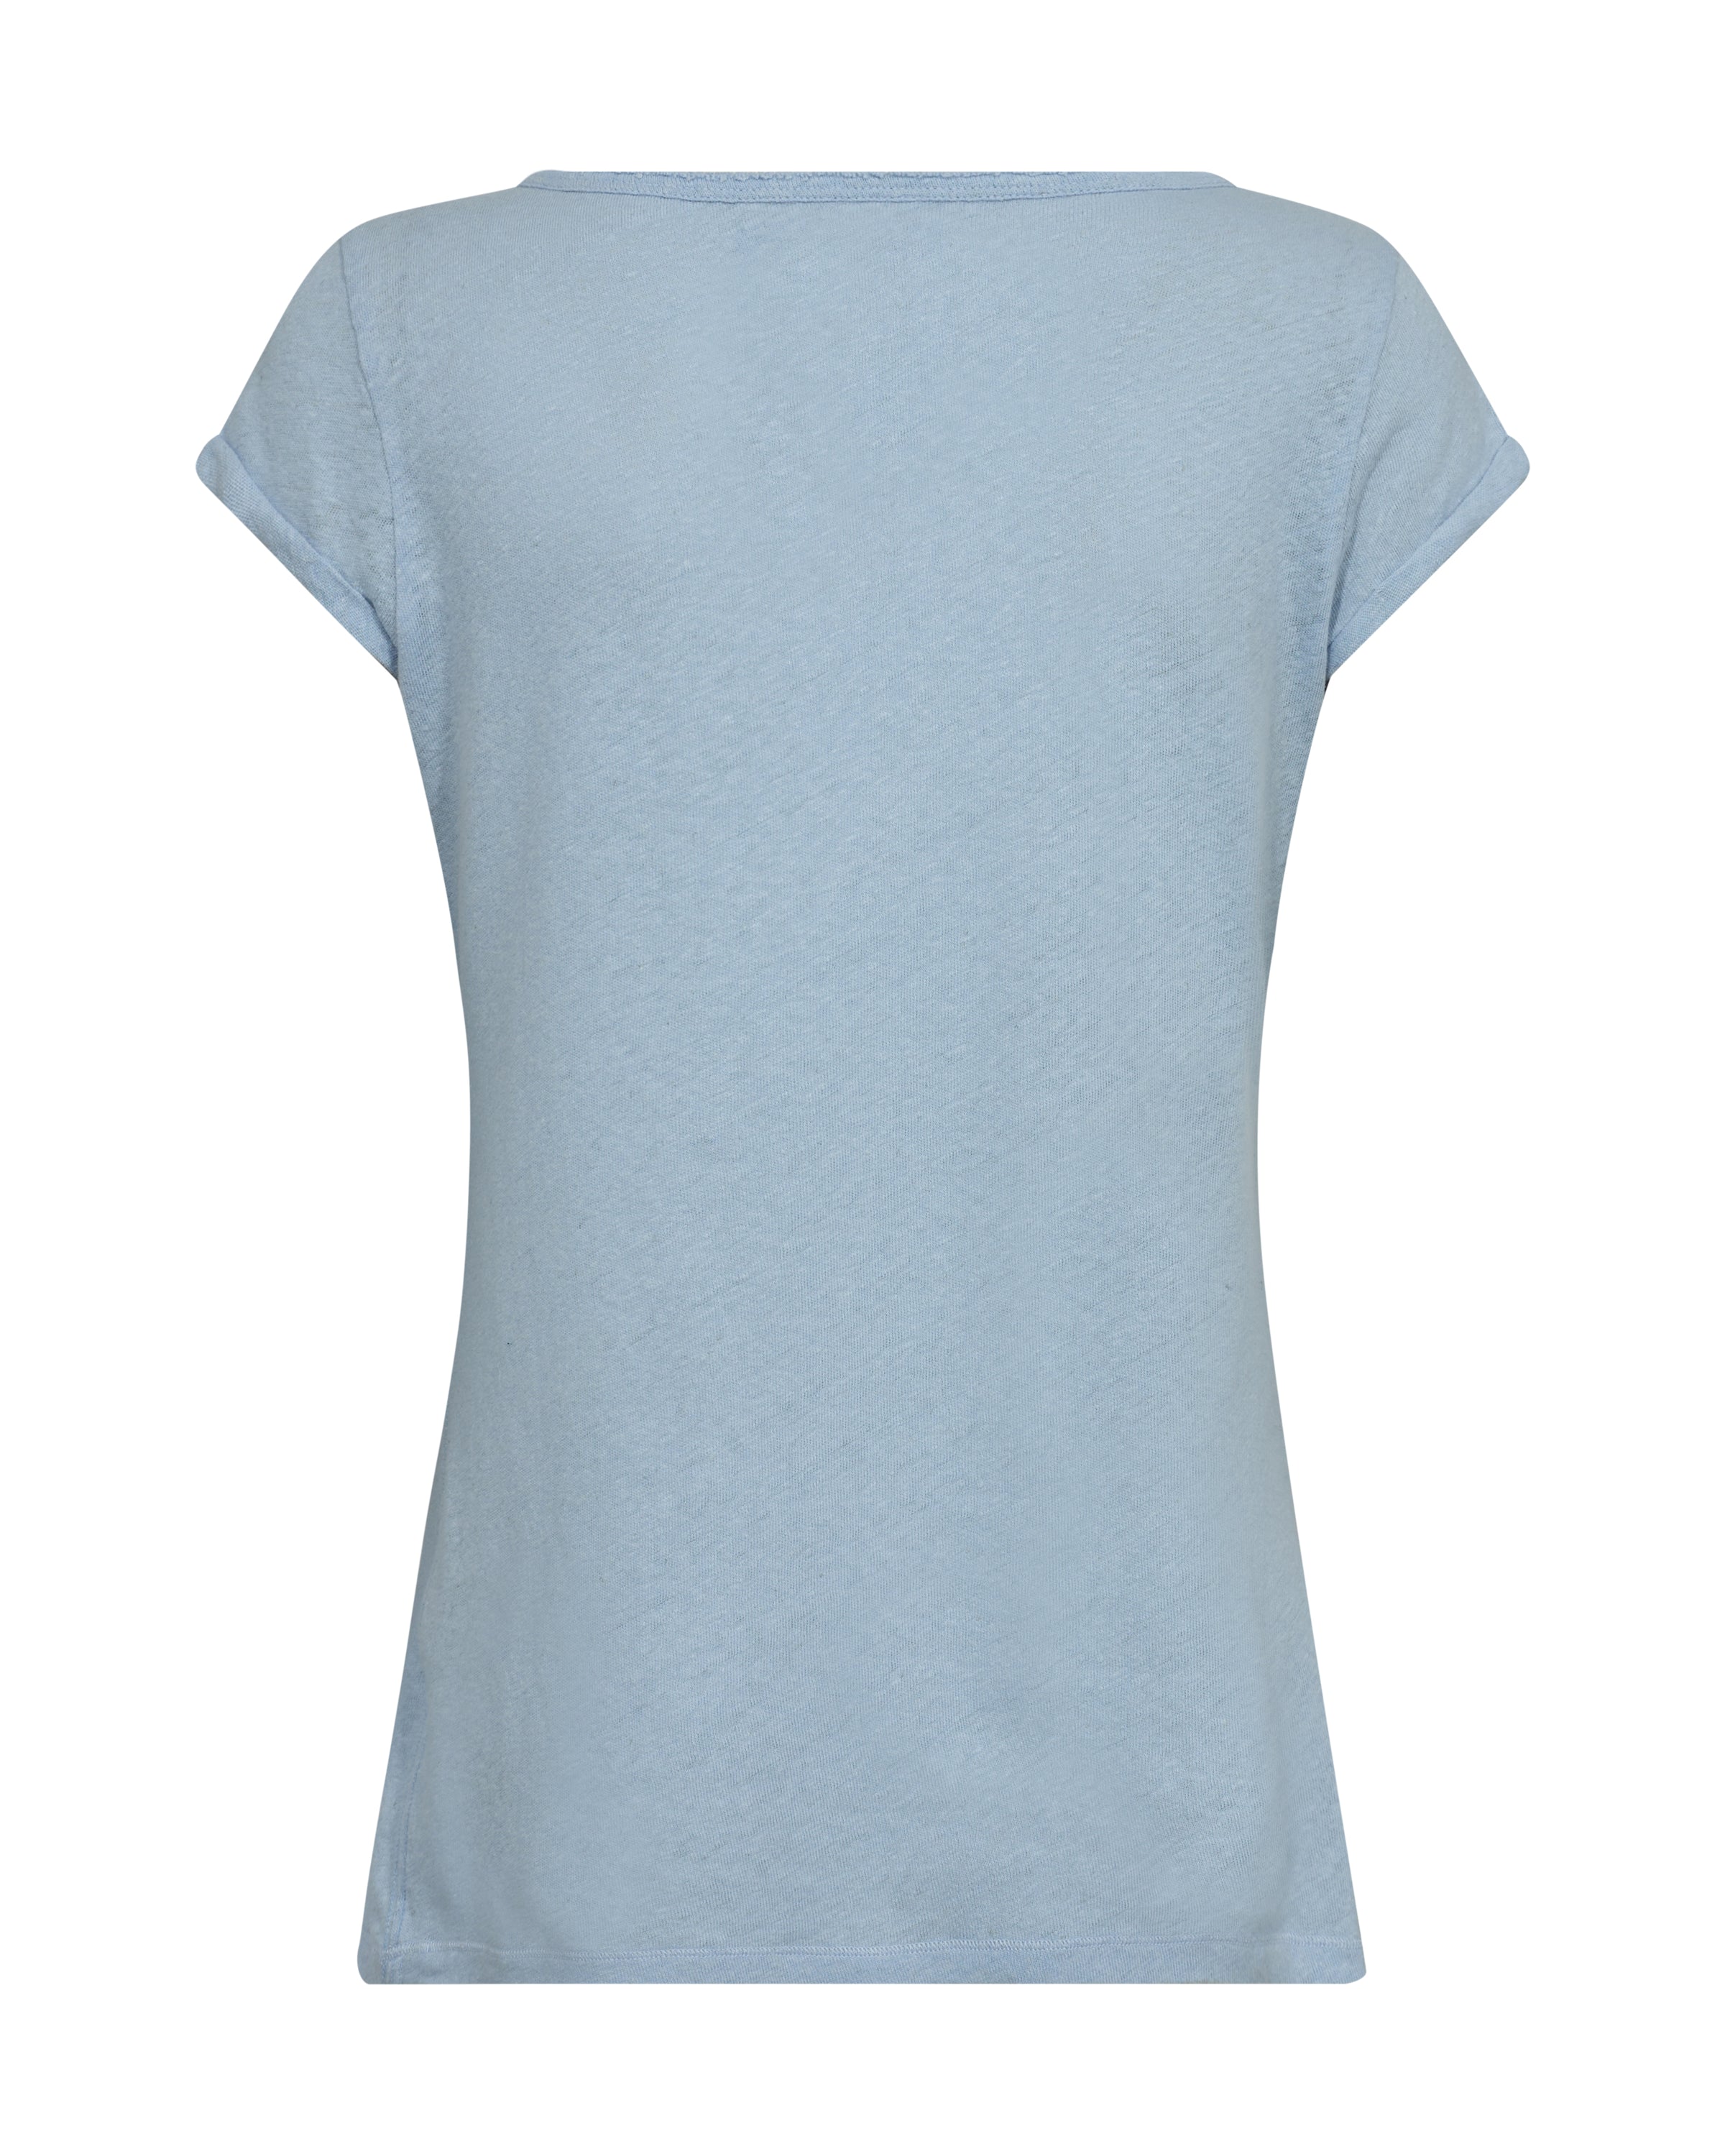 Rear view of linen and cotton blend t shirt with notch neck and short sleeves in pale blue